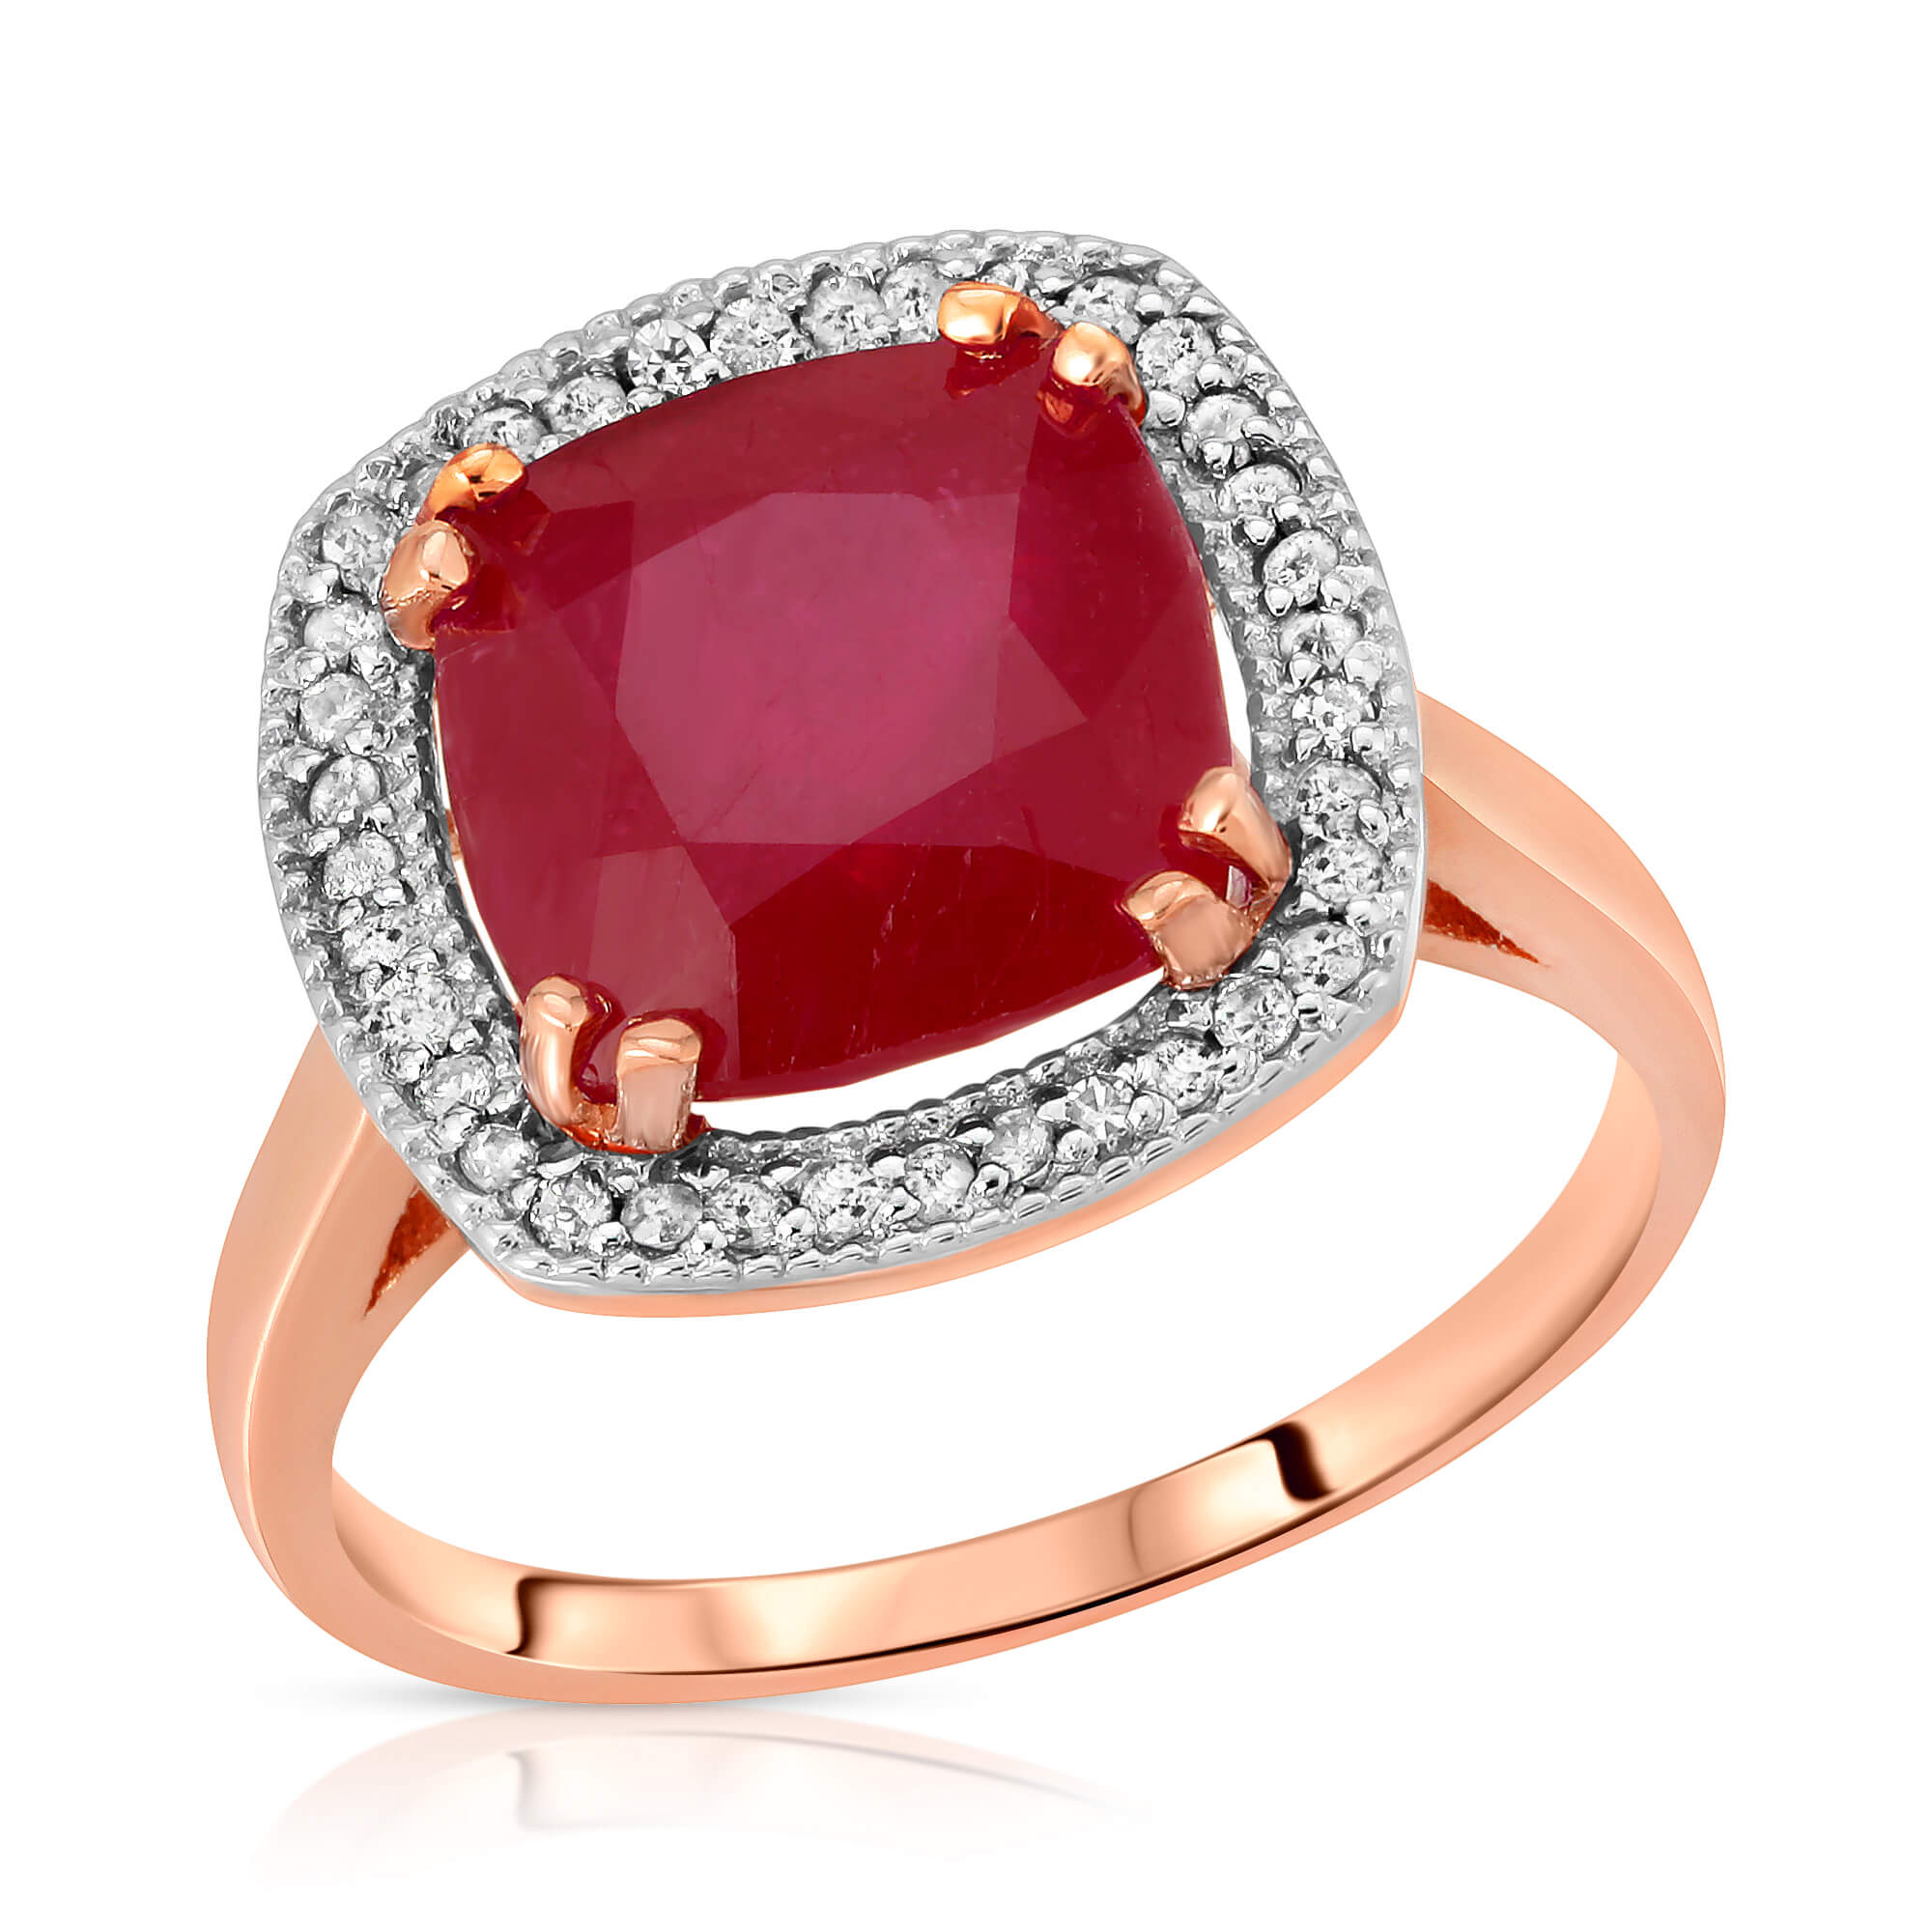 Cushion Cut Ruby Ring 6.9 ctw in 9ct Rose Gold